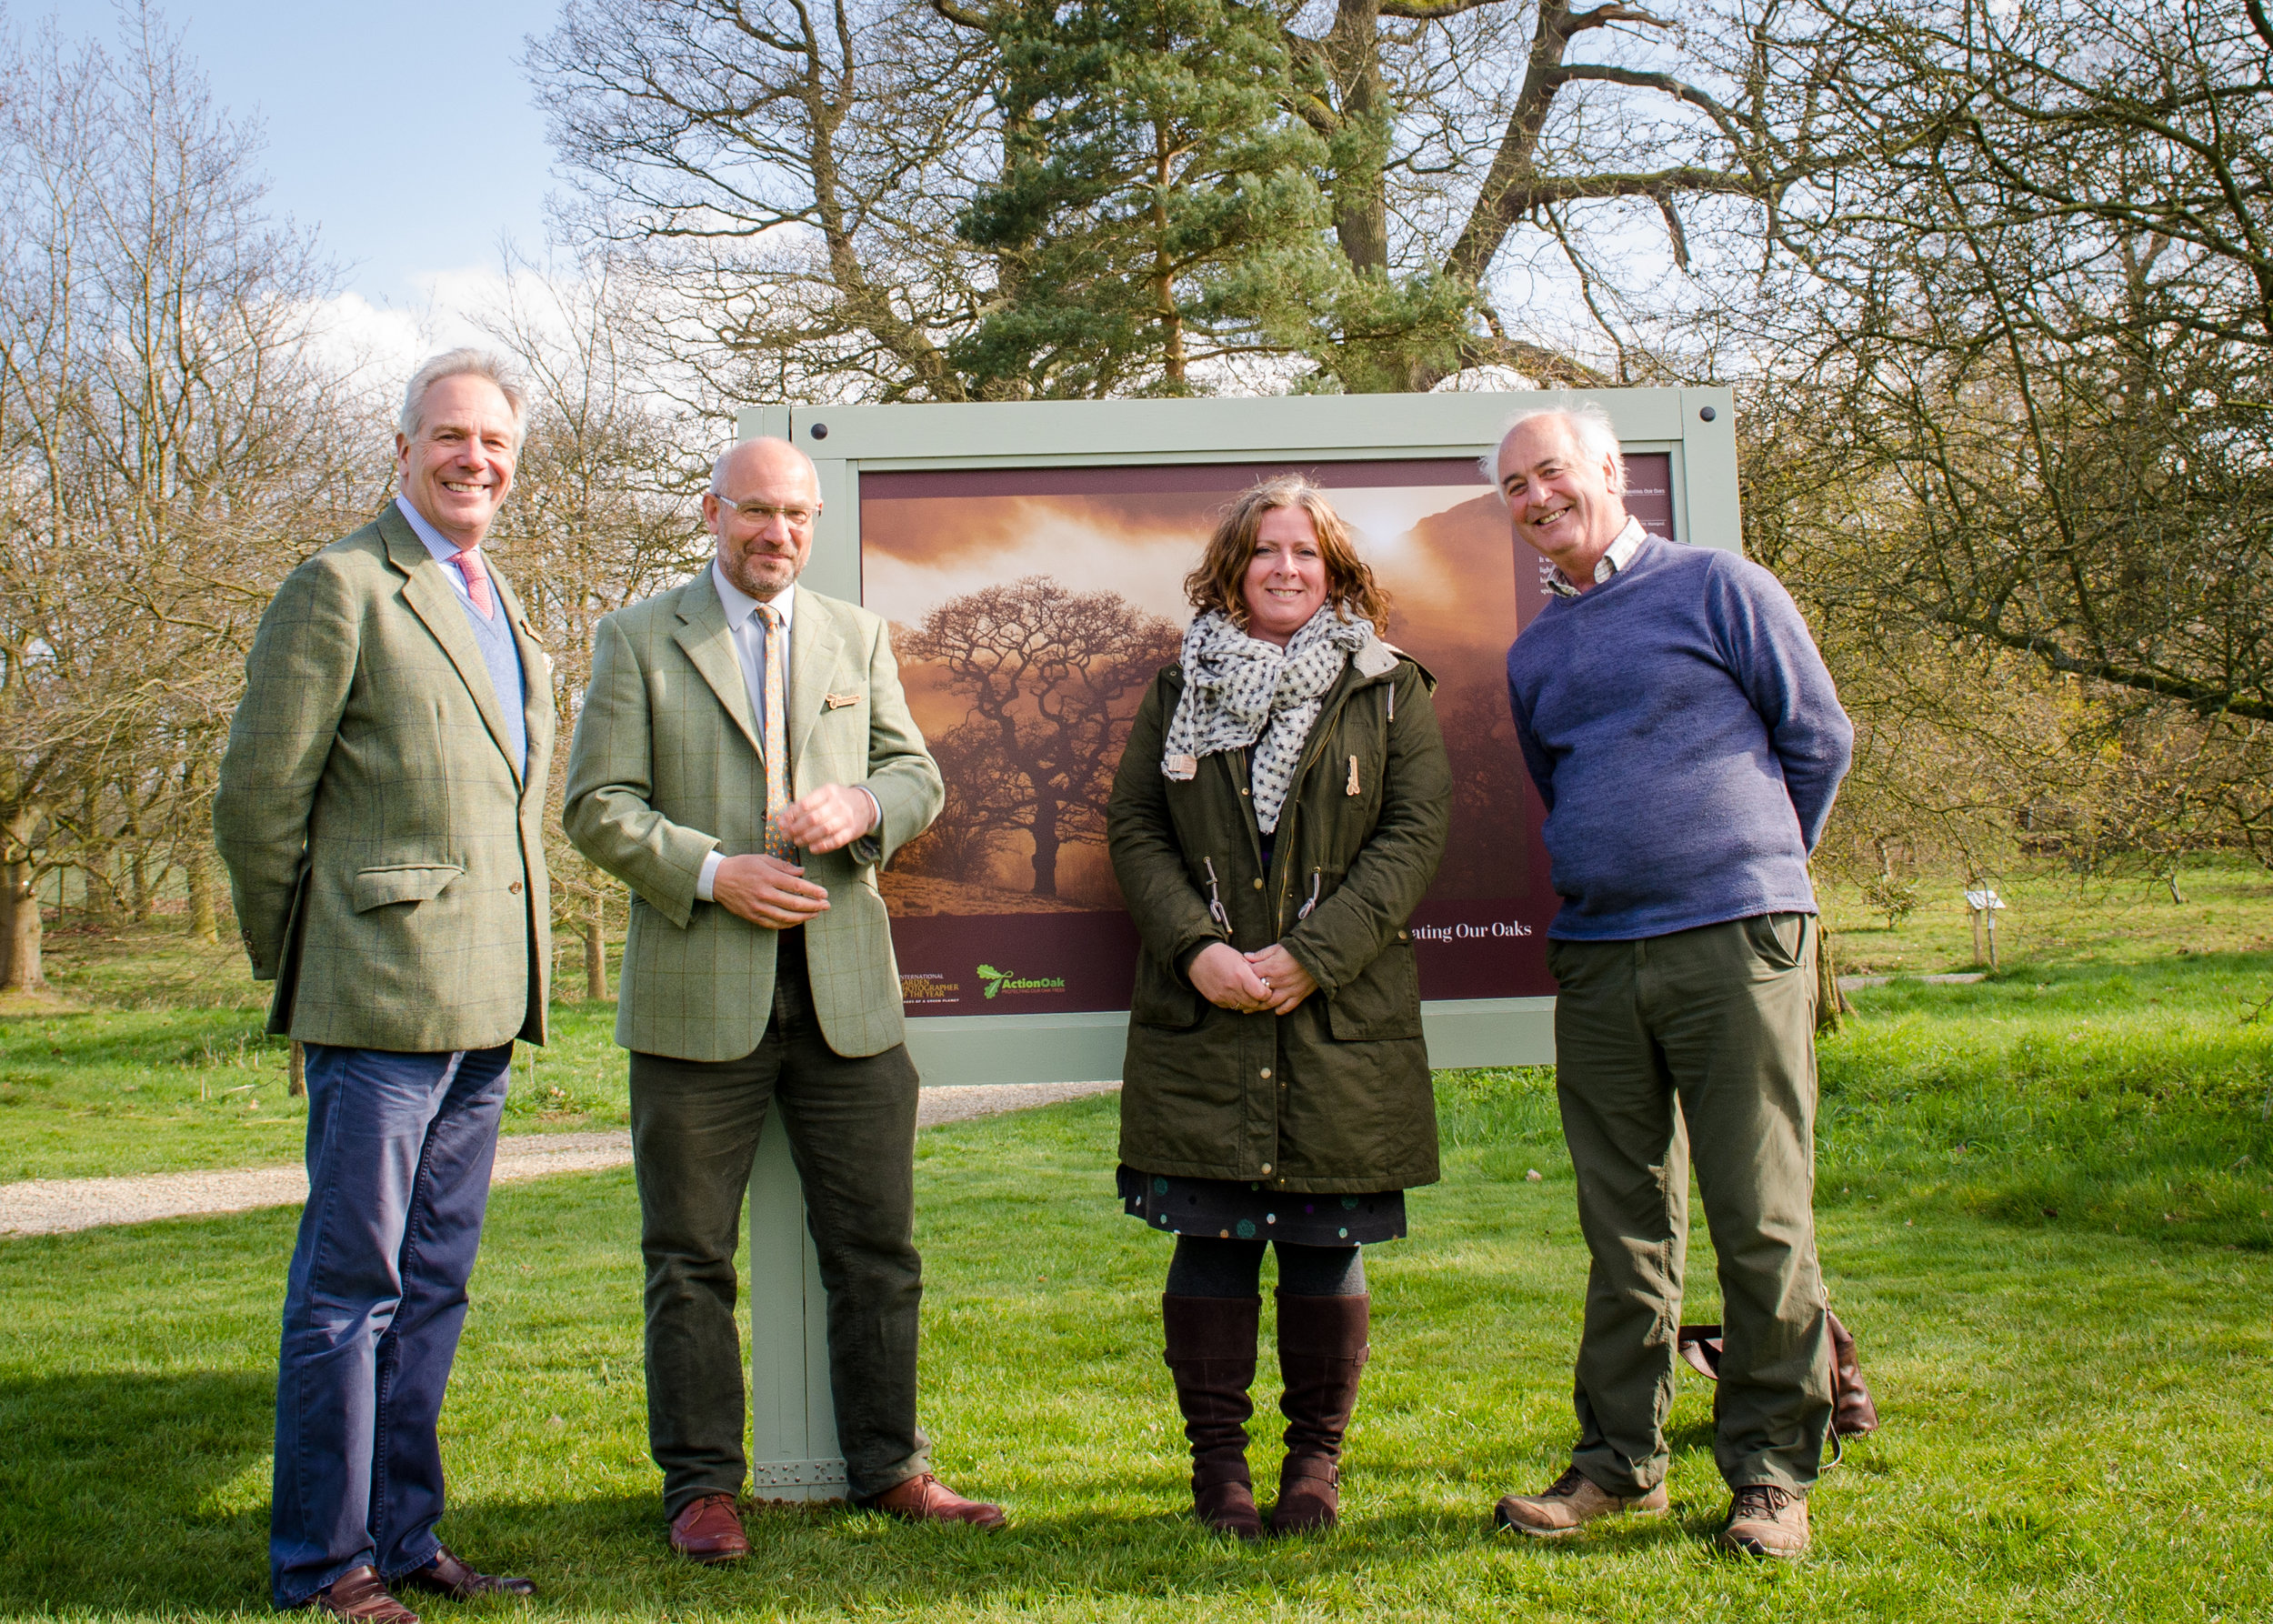 National Tree Champion Sir William Worsley Opens 'Celebrating our Oaks' Exhibition at the Yorkshire Arboretum